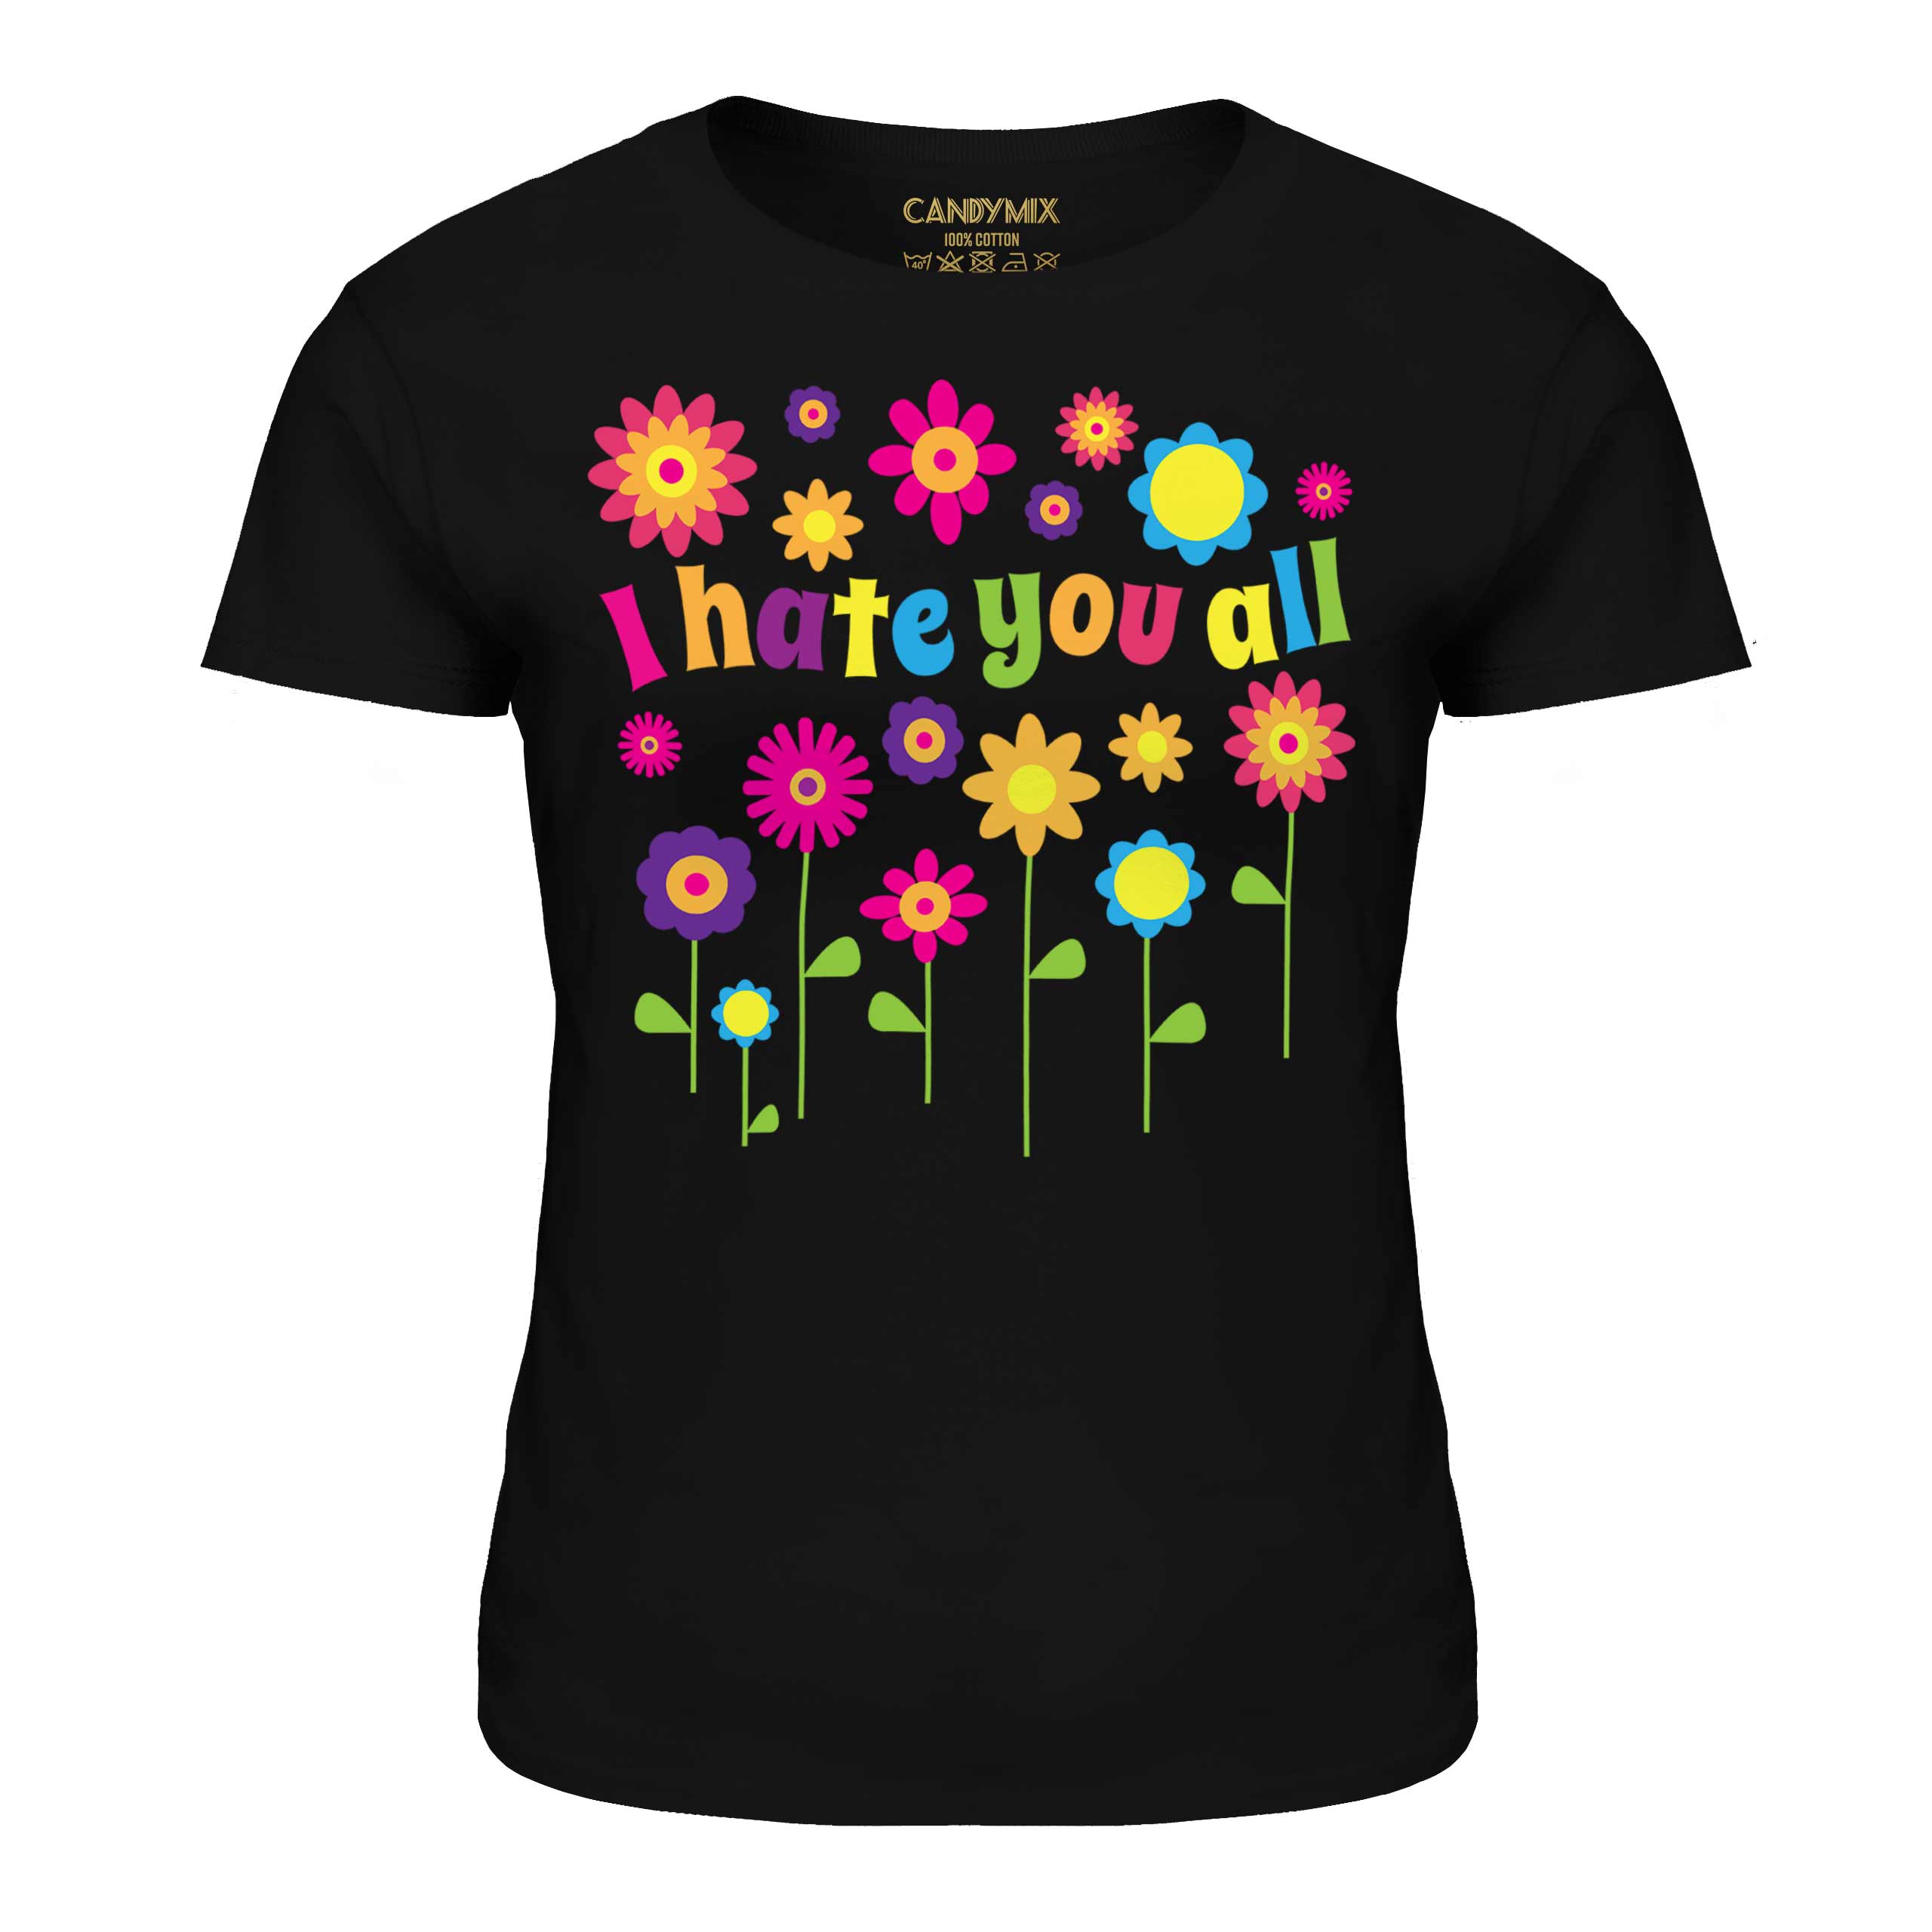 All Yours Cotton T-Shirt, Women's Short Sleeve Shirts & Tee's